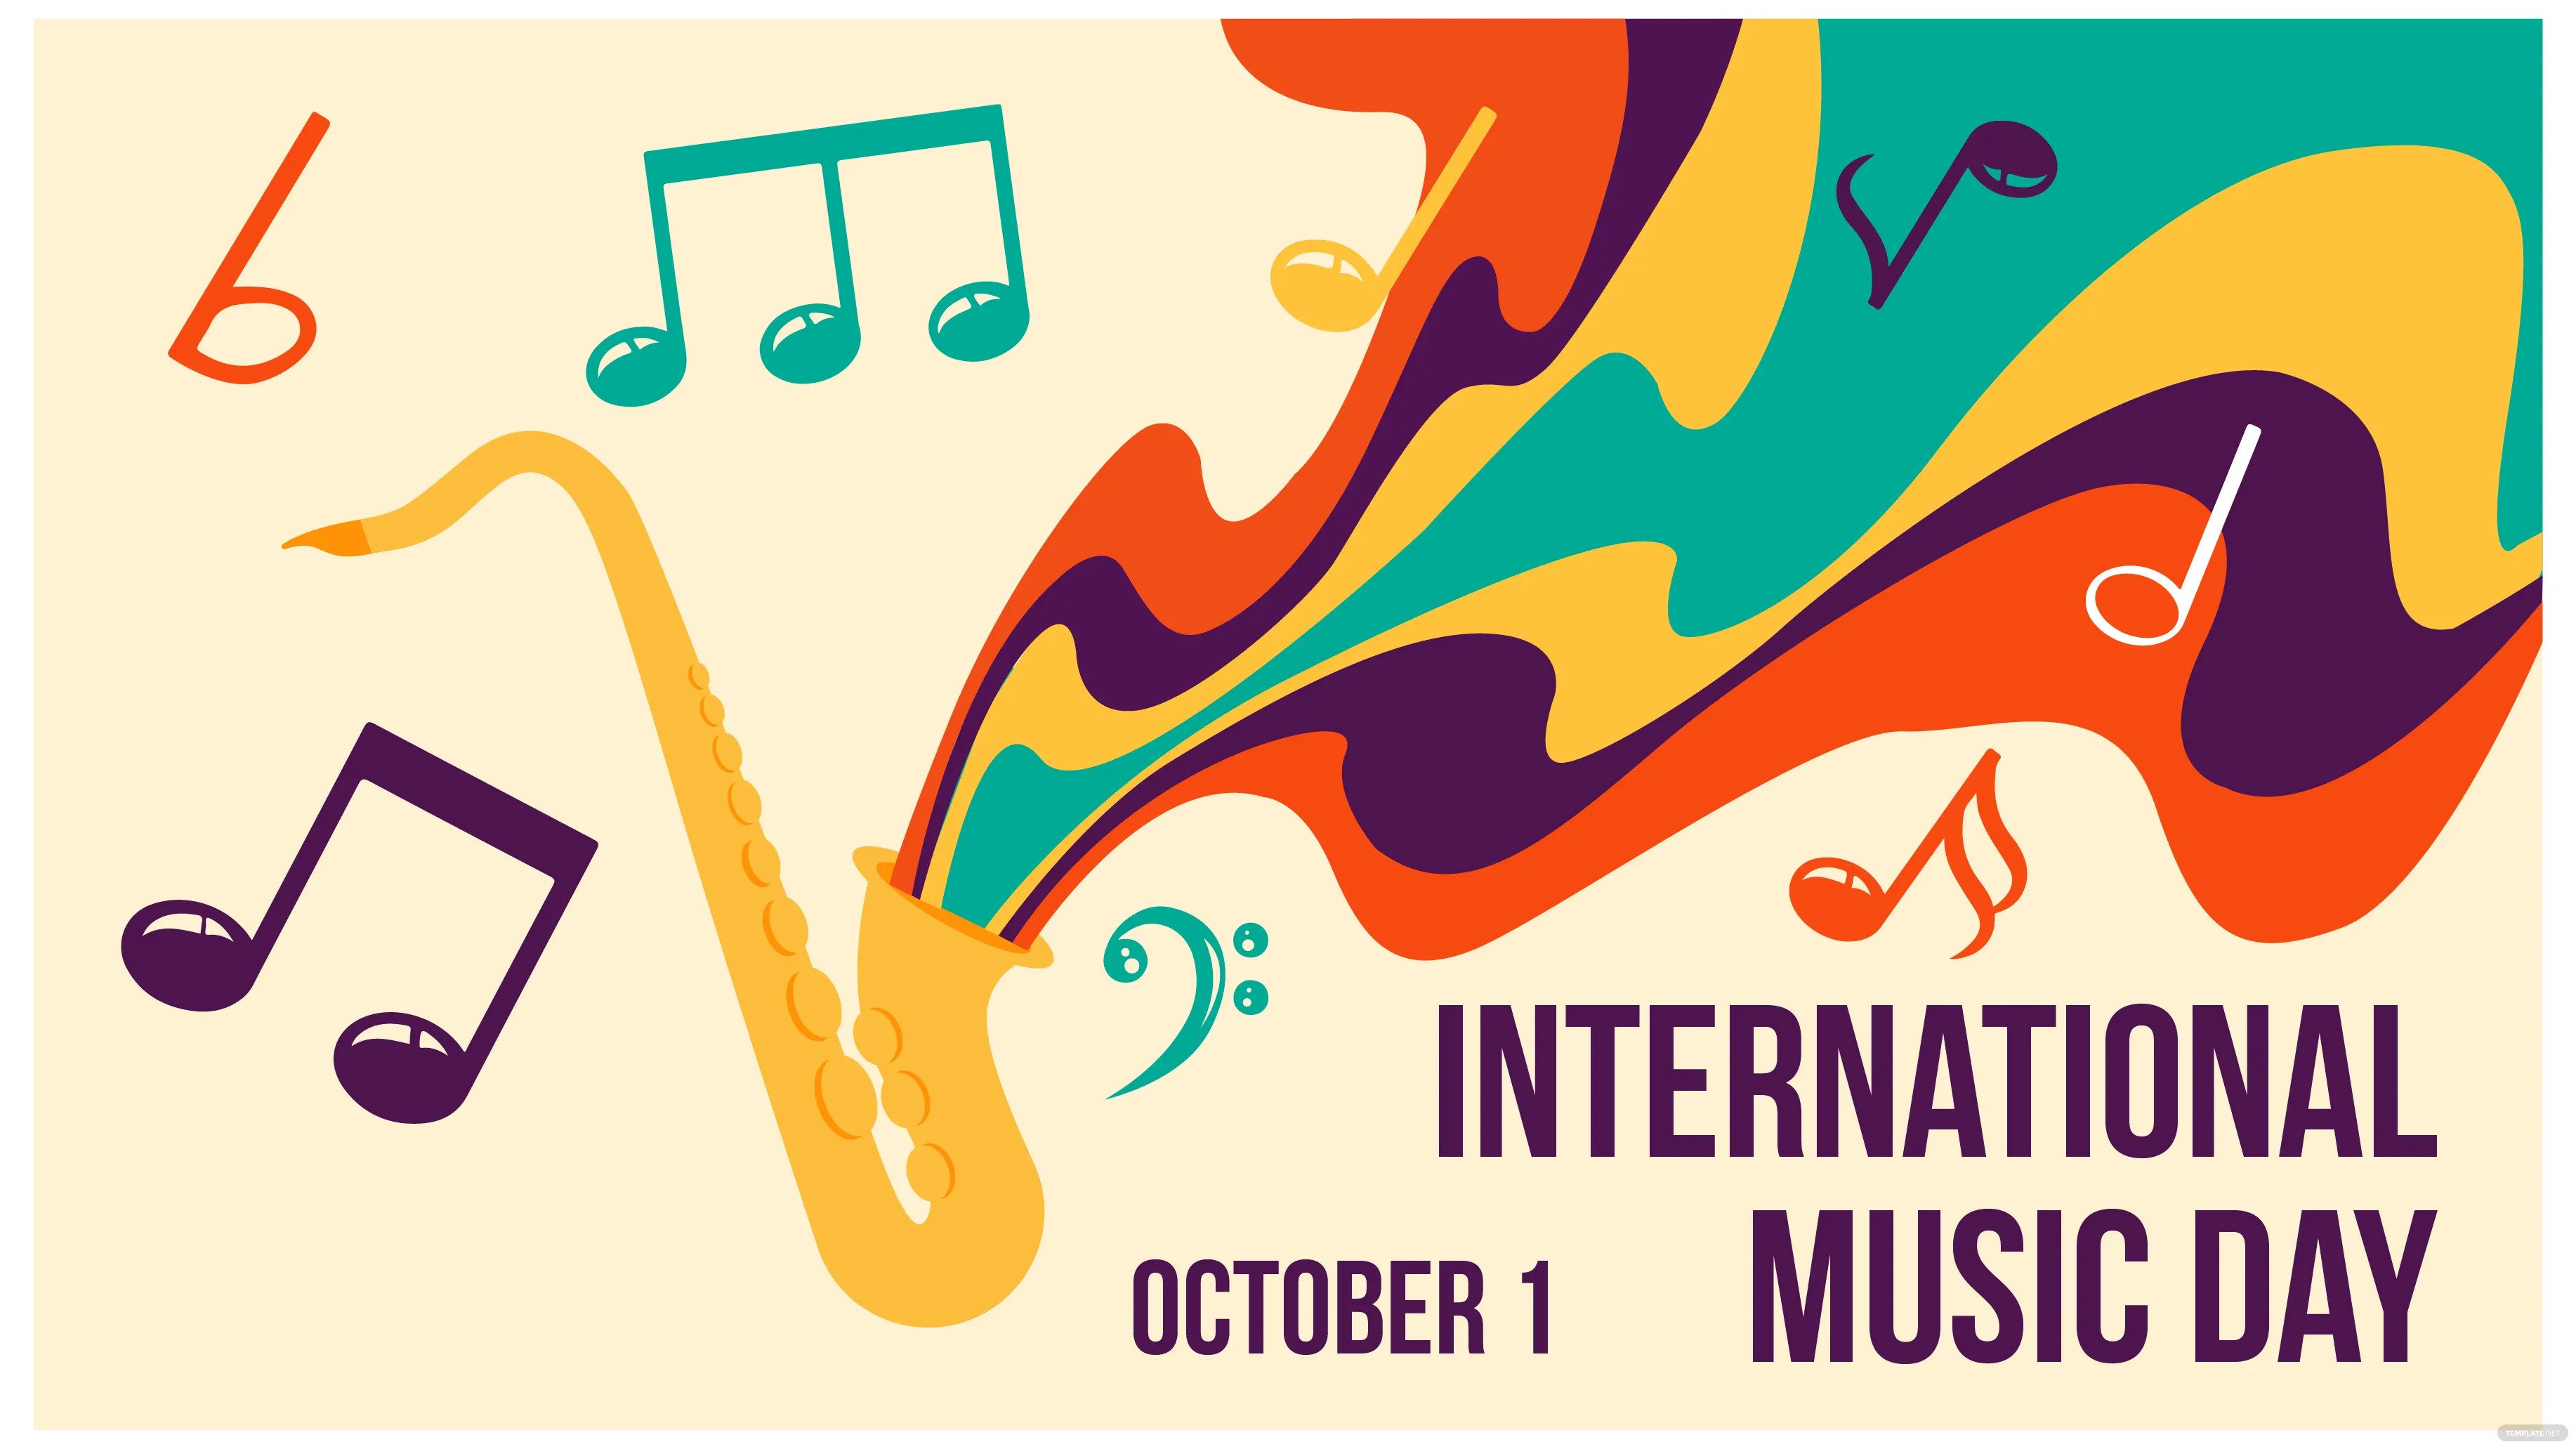 international music day image background ideas and examples